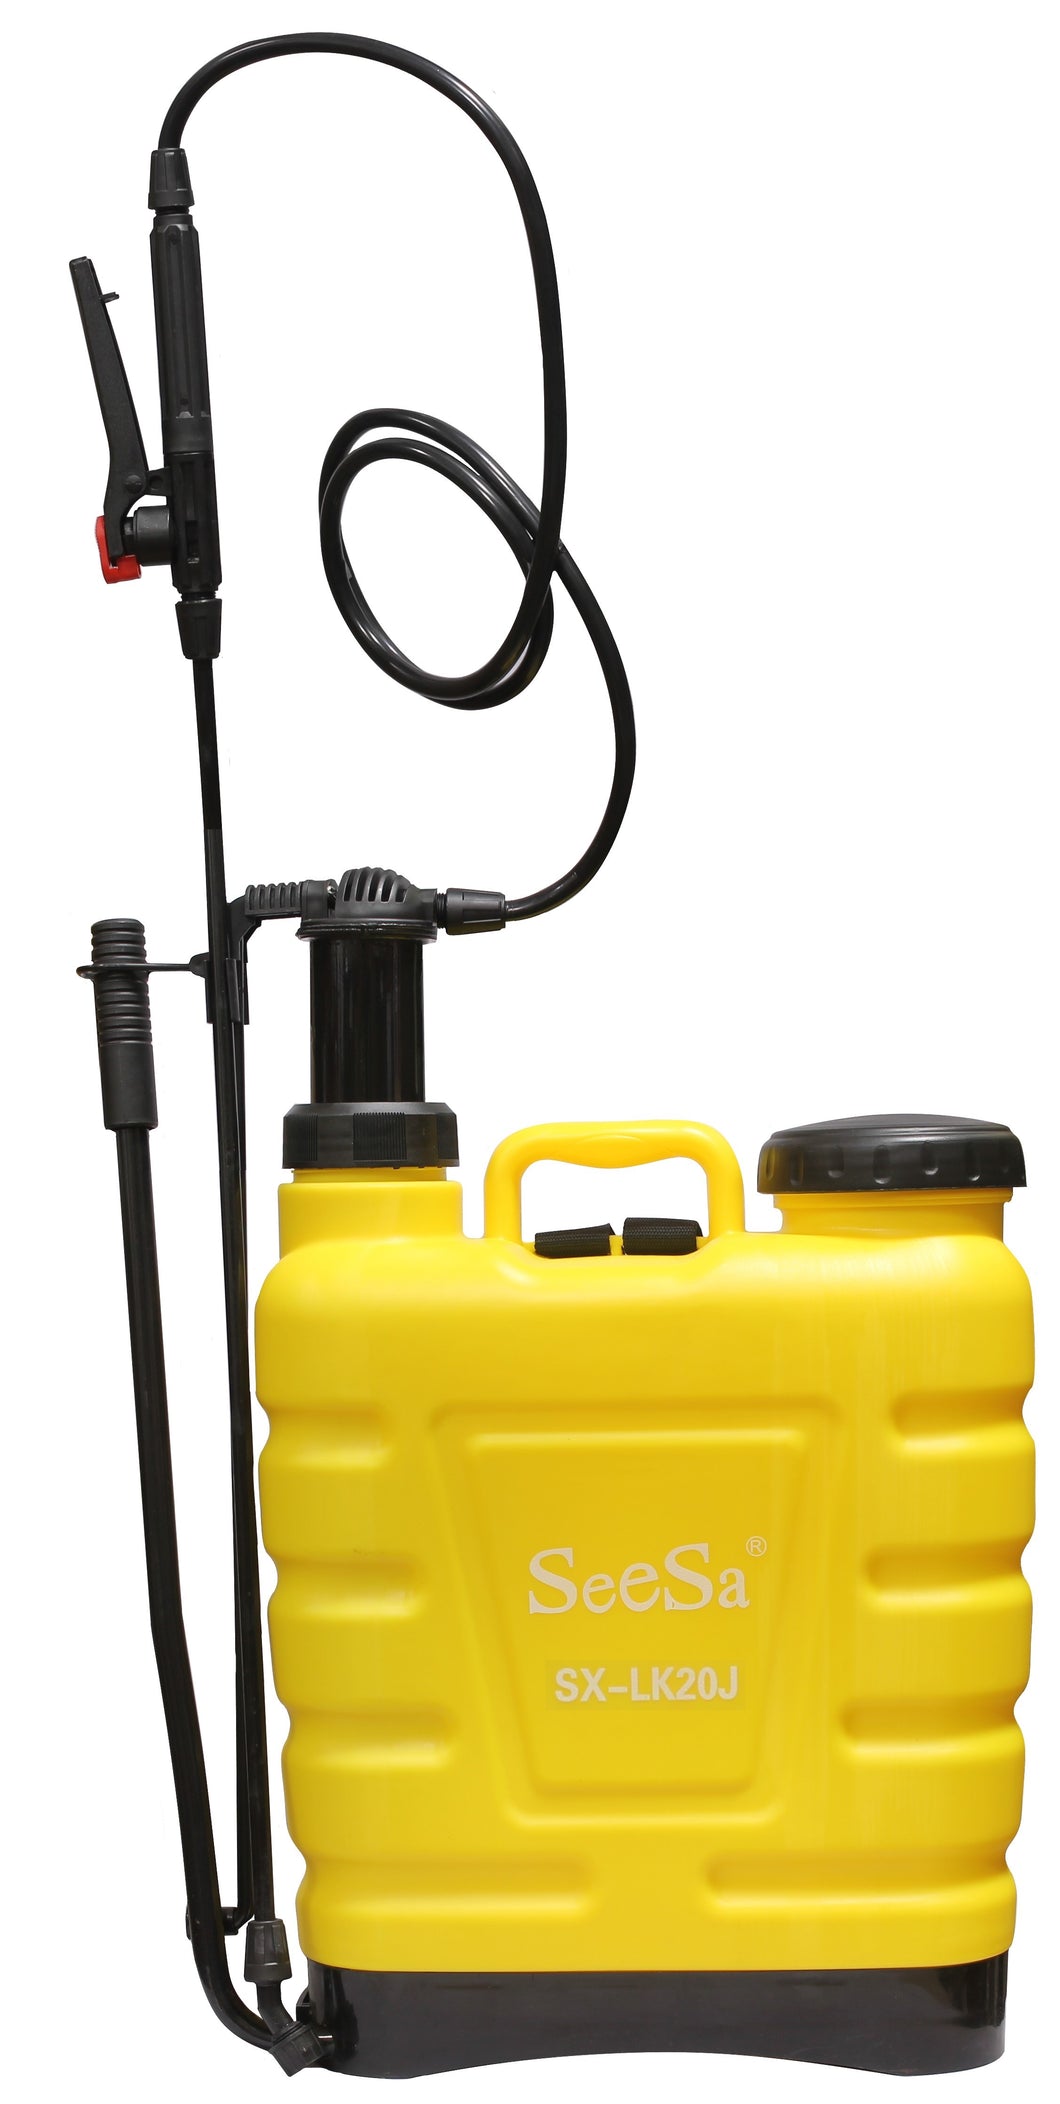 CHS 20 Litre yellow Portable Plastic backpack manual insecticide/pesticide sprayer with fiber glass lance wand